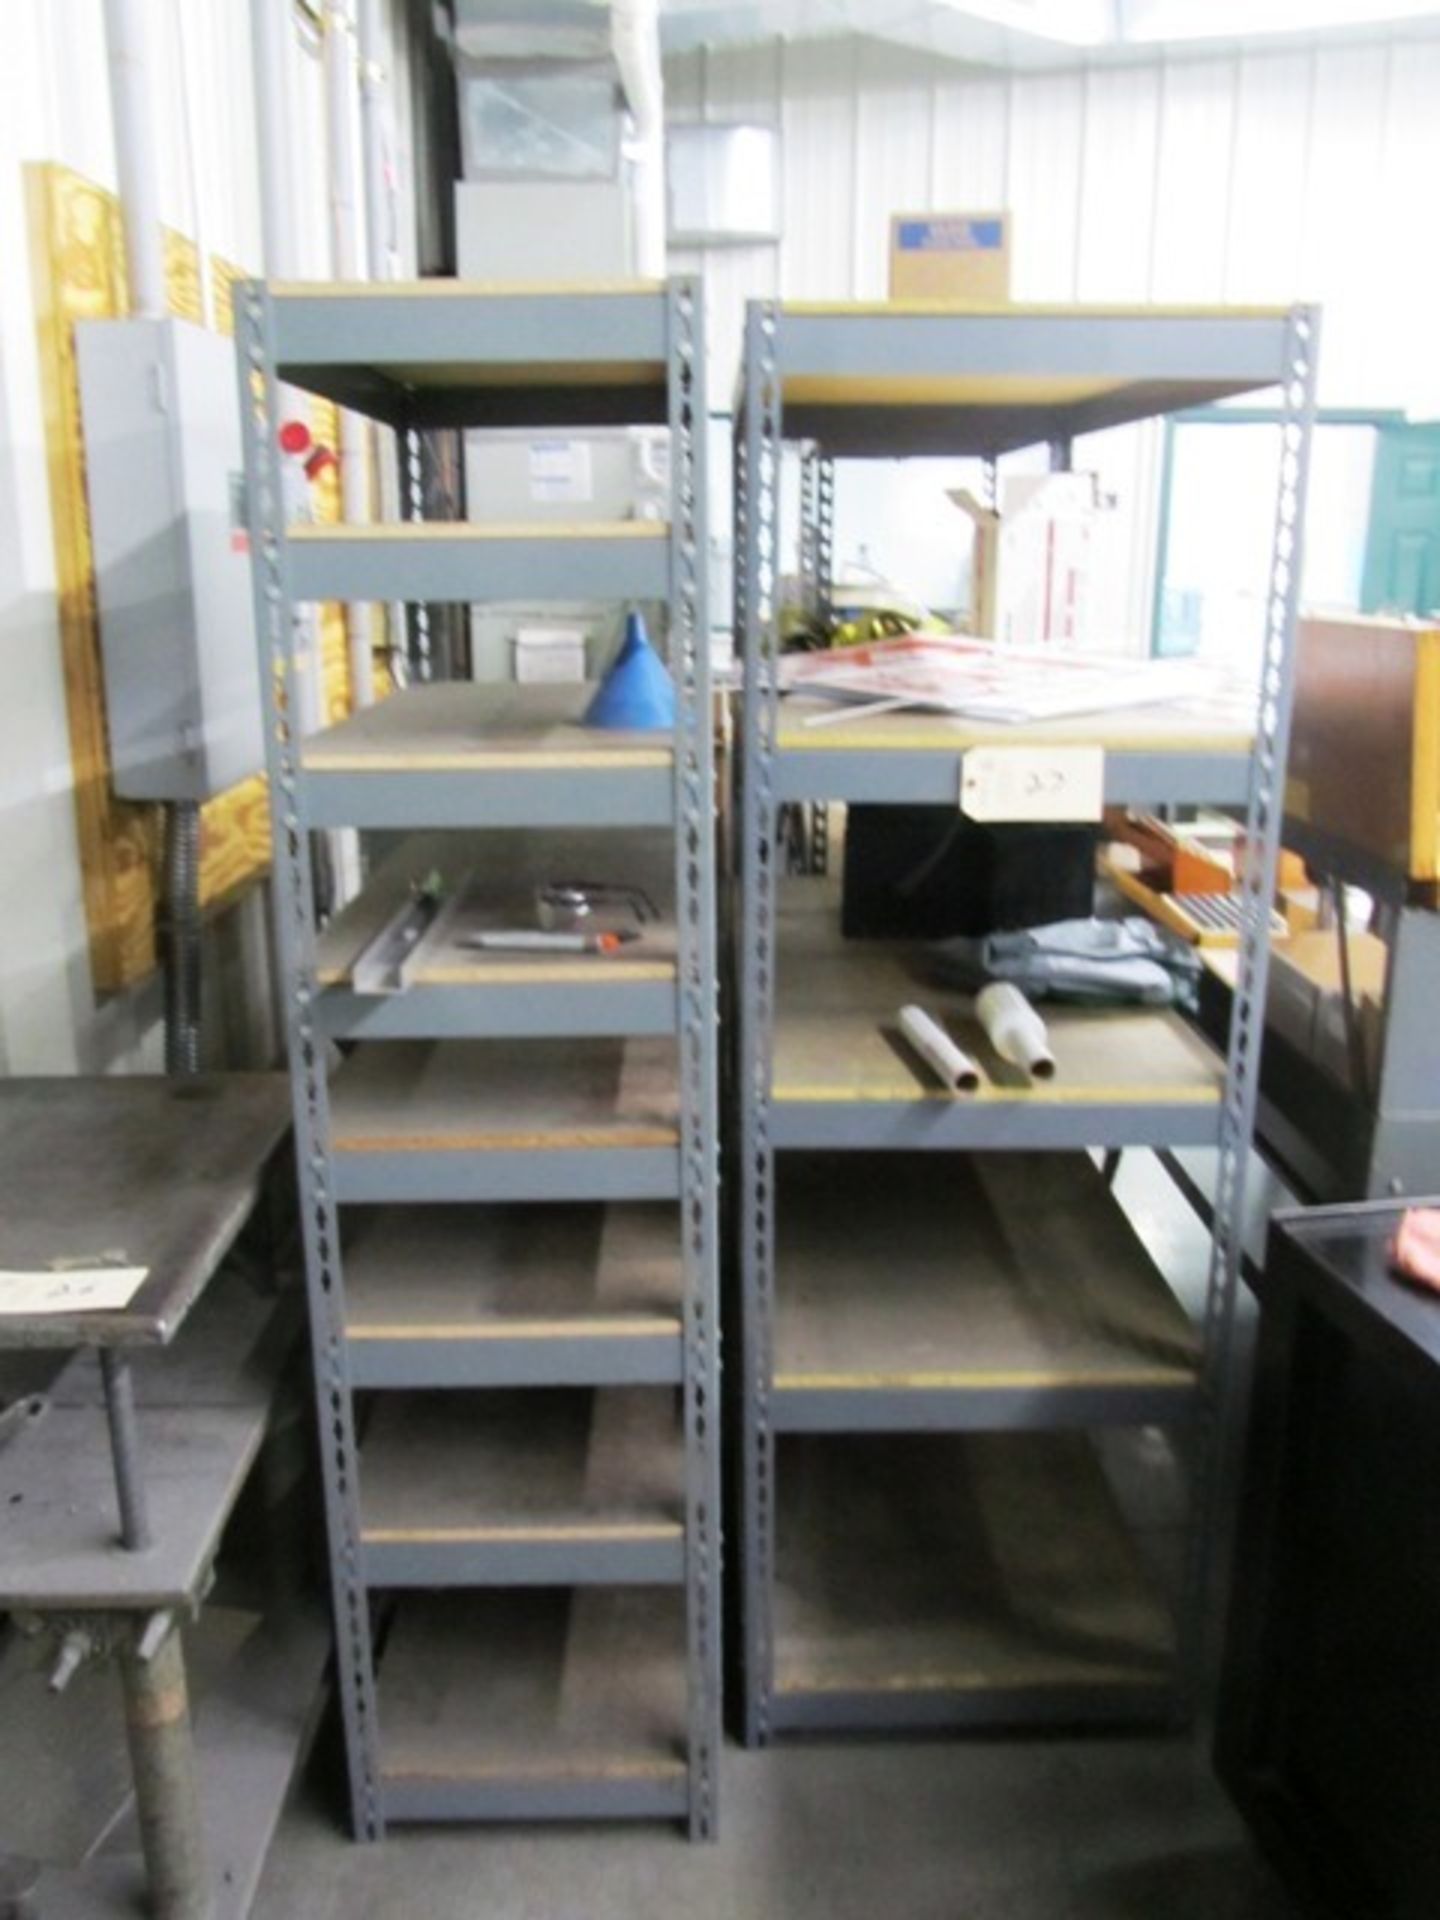 3 Sections of Shelving (no contents)